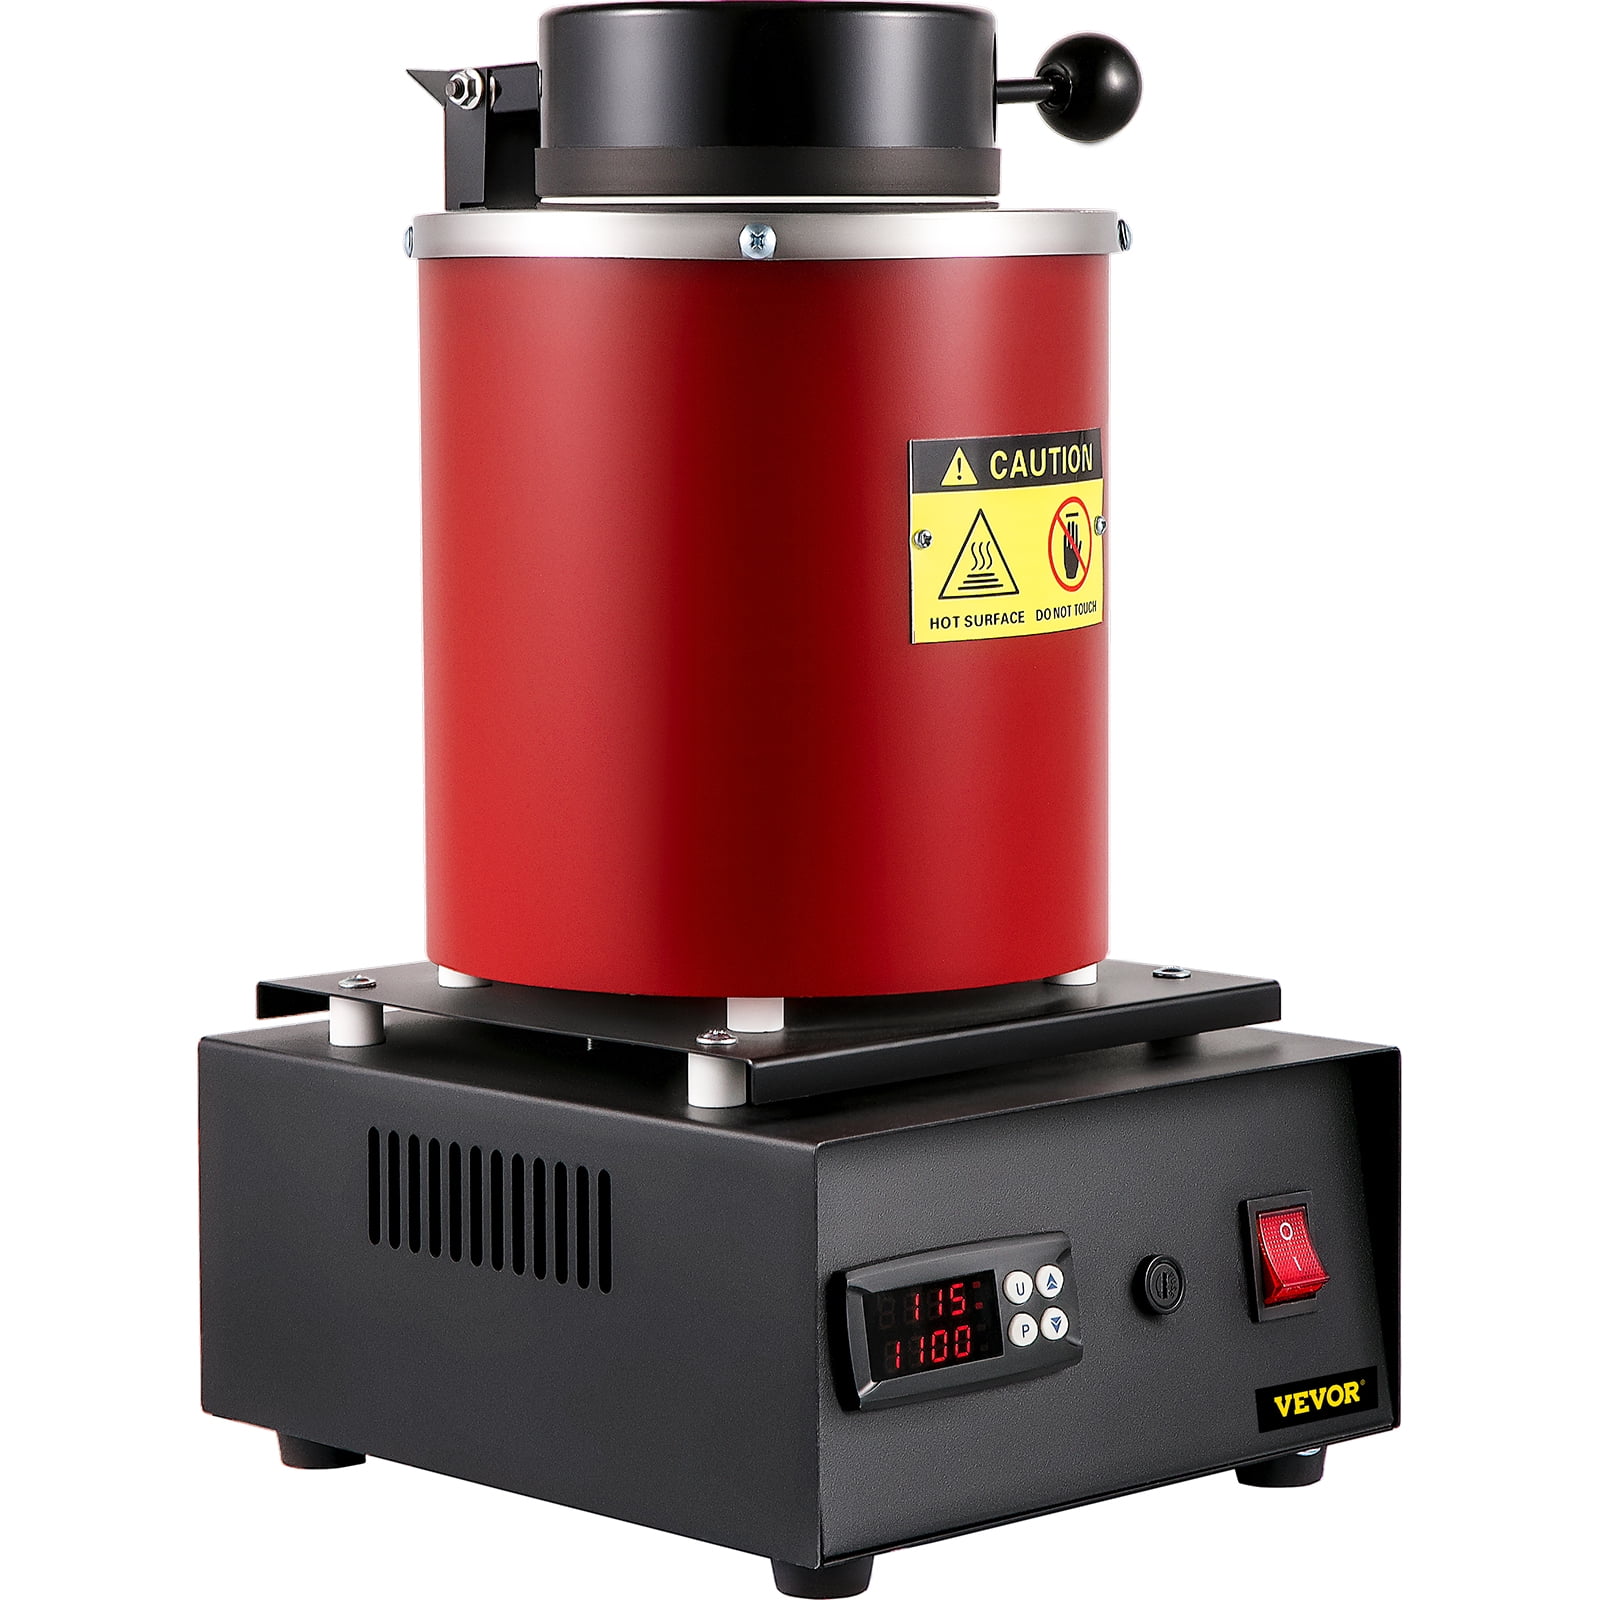  LBWF 1600W Electric Gold Melting Furnace, High Temperature  Refining Cast Vacuum Metal Casting Kit, 1150℃ /2102 ℉ Digital Metal  Smelting Machine,for Gold Silver Aluminum Jewelry Making